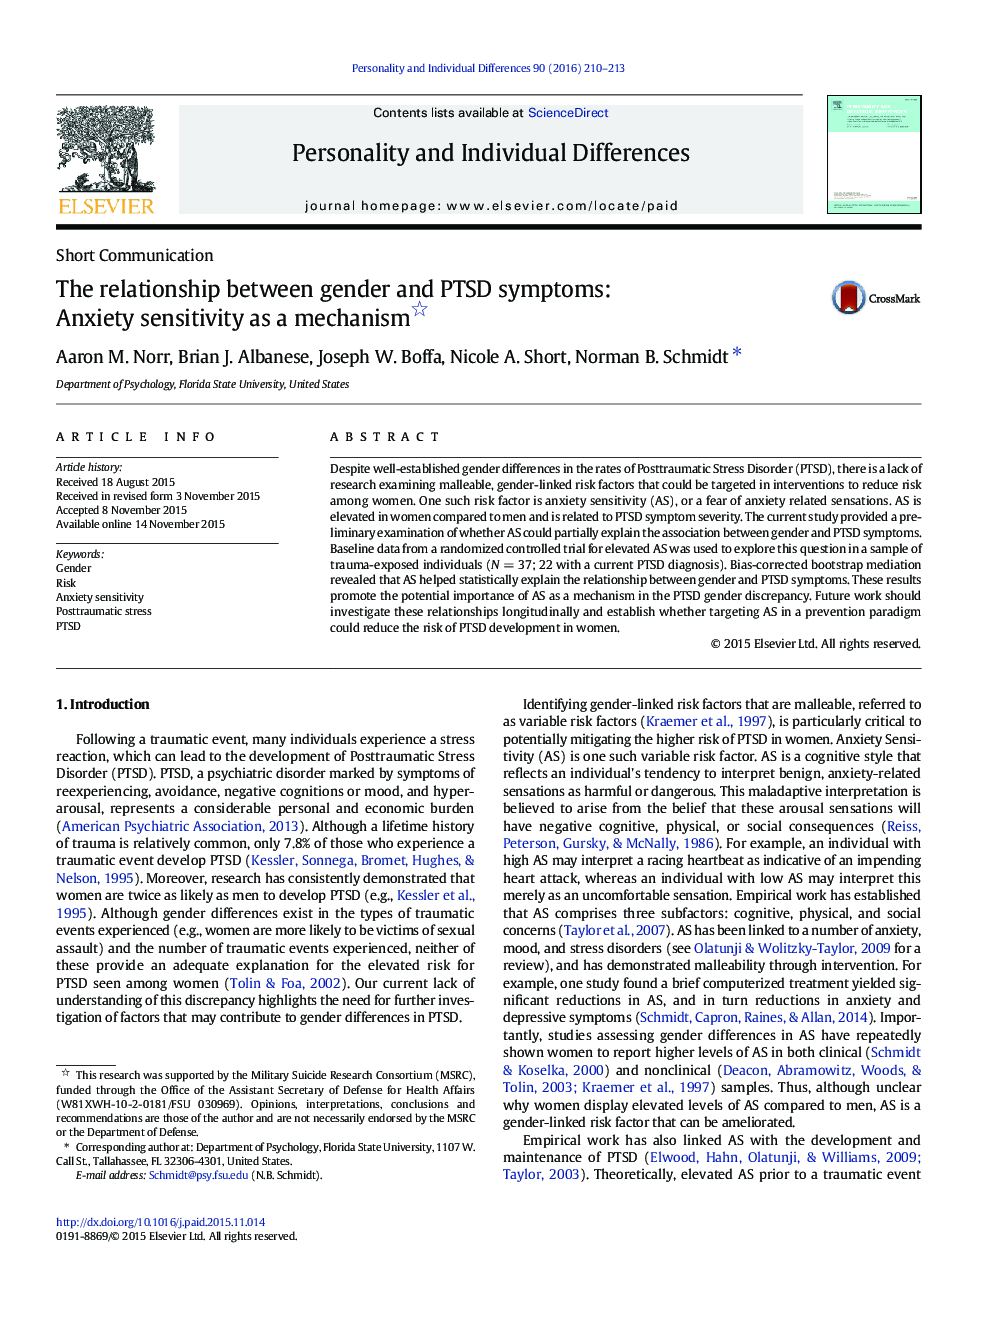 The relationship between gender and PTSD symptoms: Anxiety sensitivity as a mechanism 